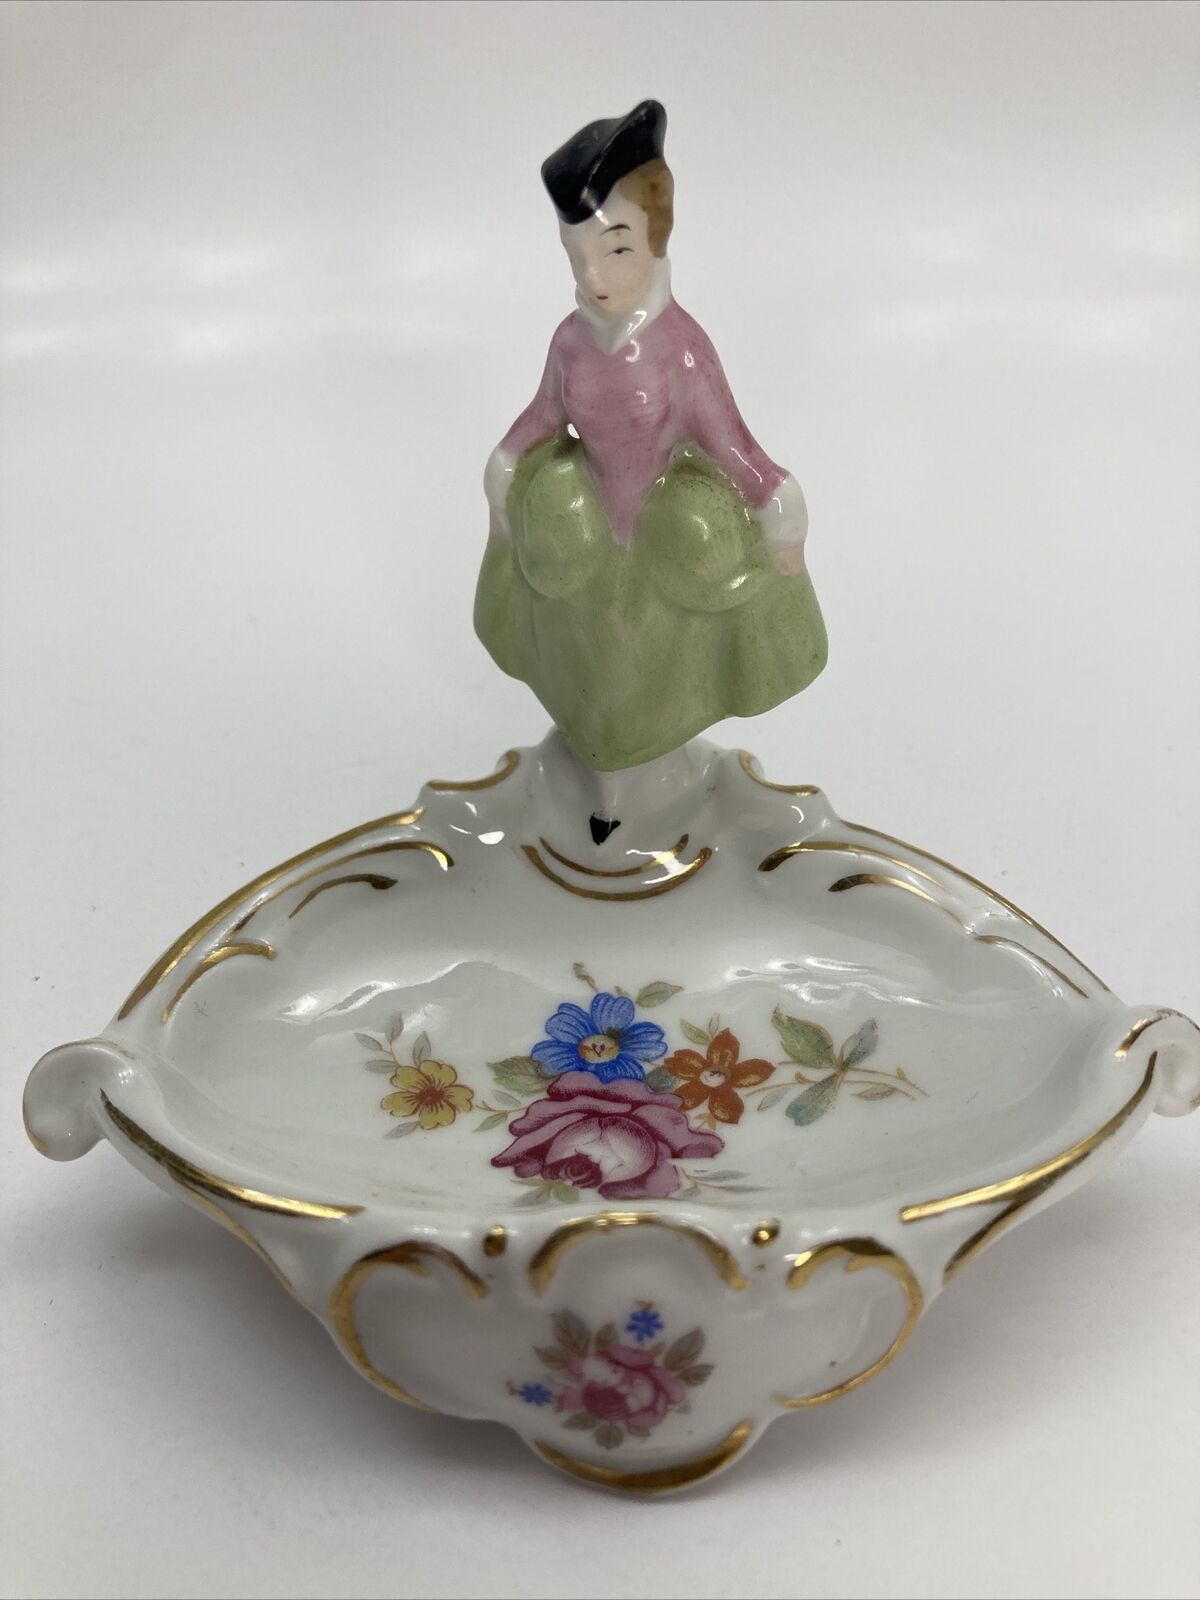 Unique Vintage Erphila Germany Figural Ashtray or Holy Water Dish